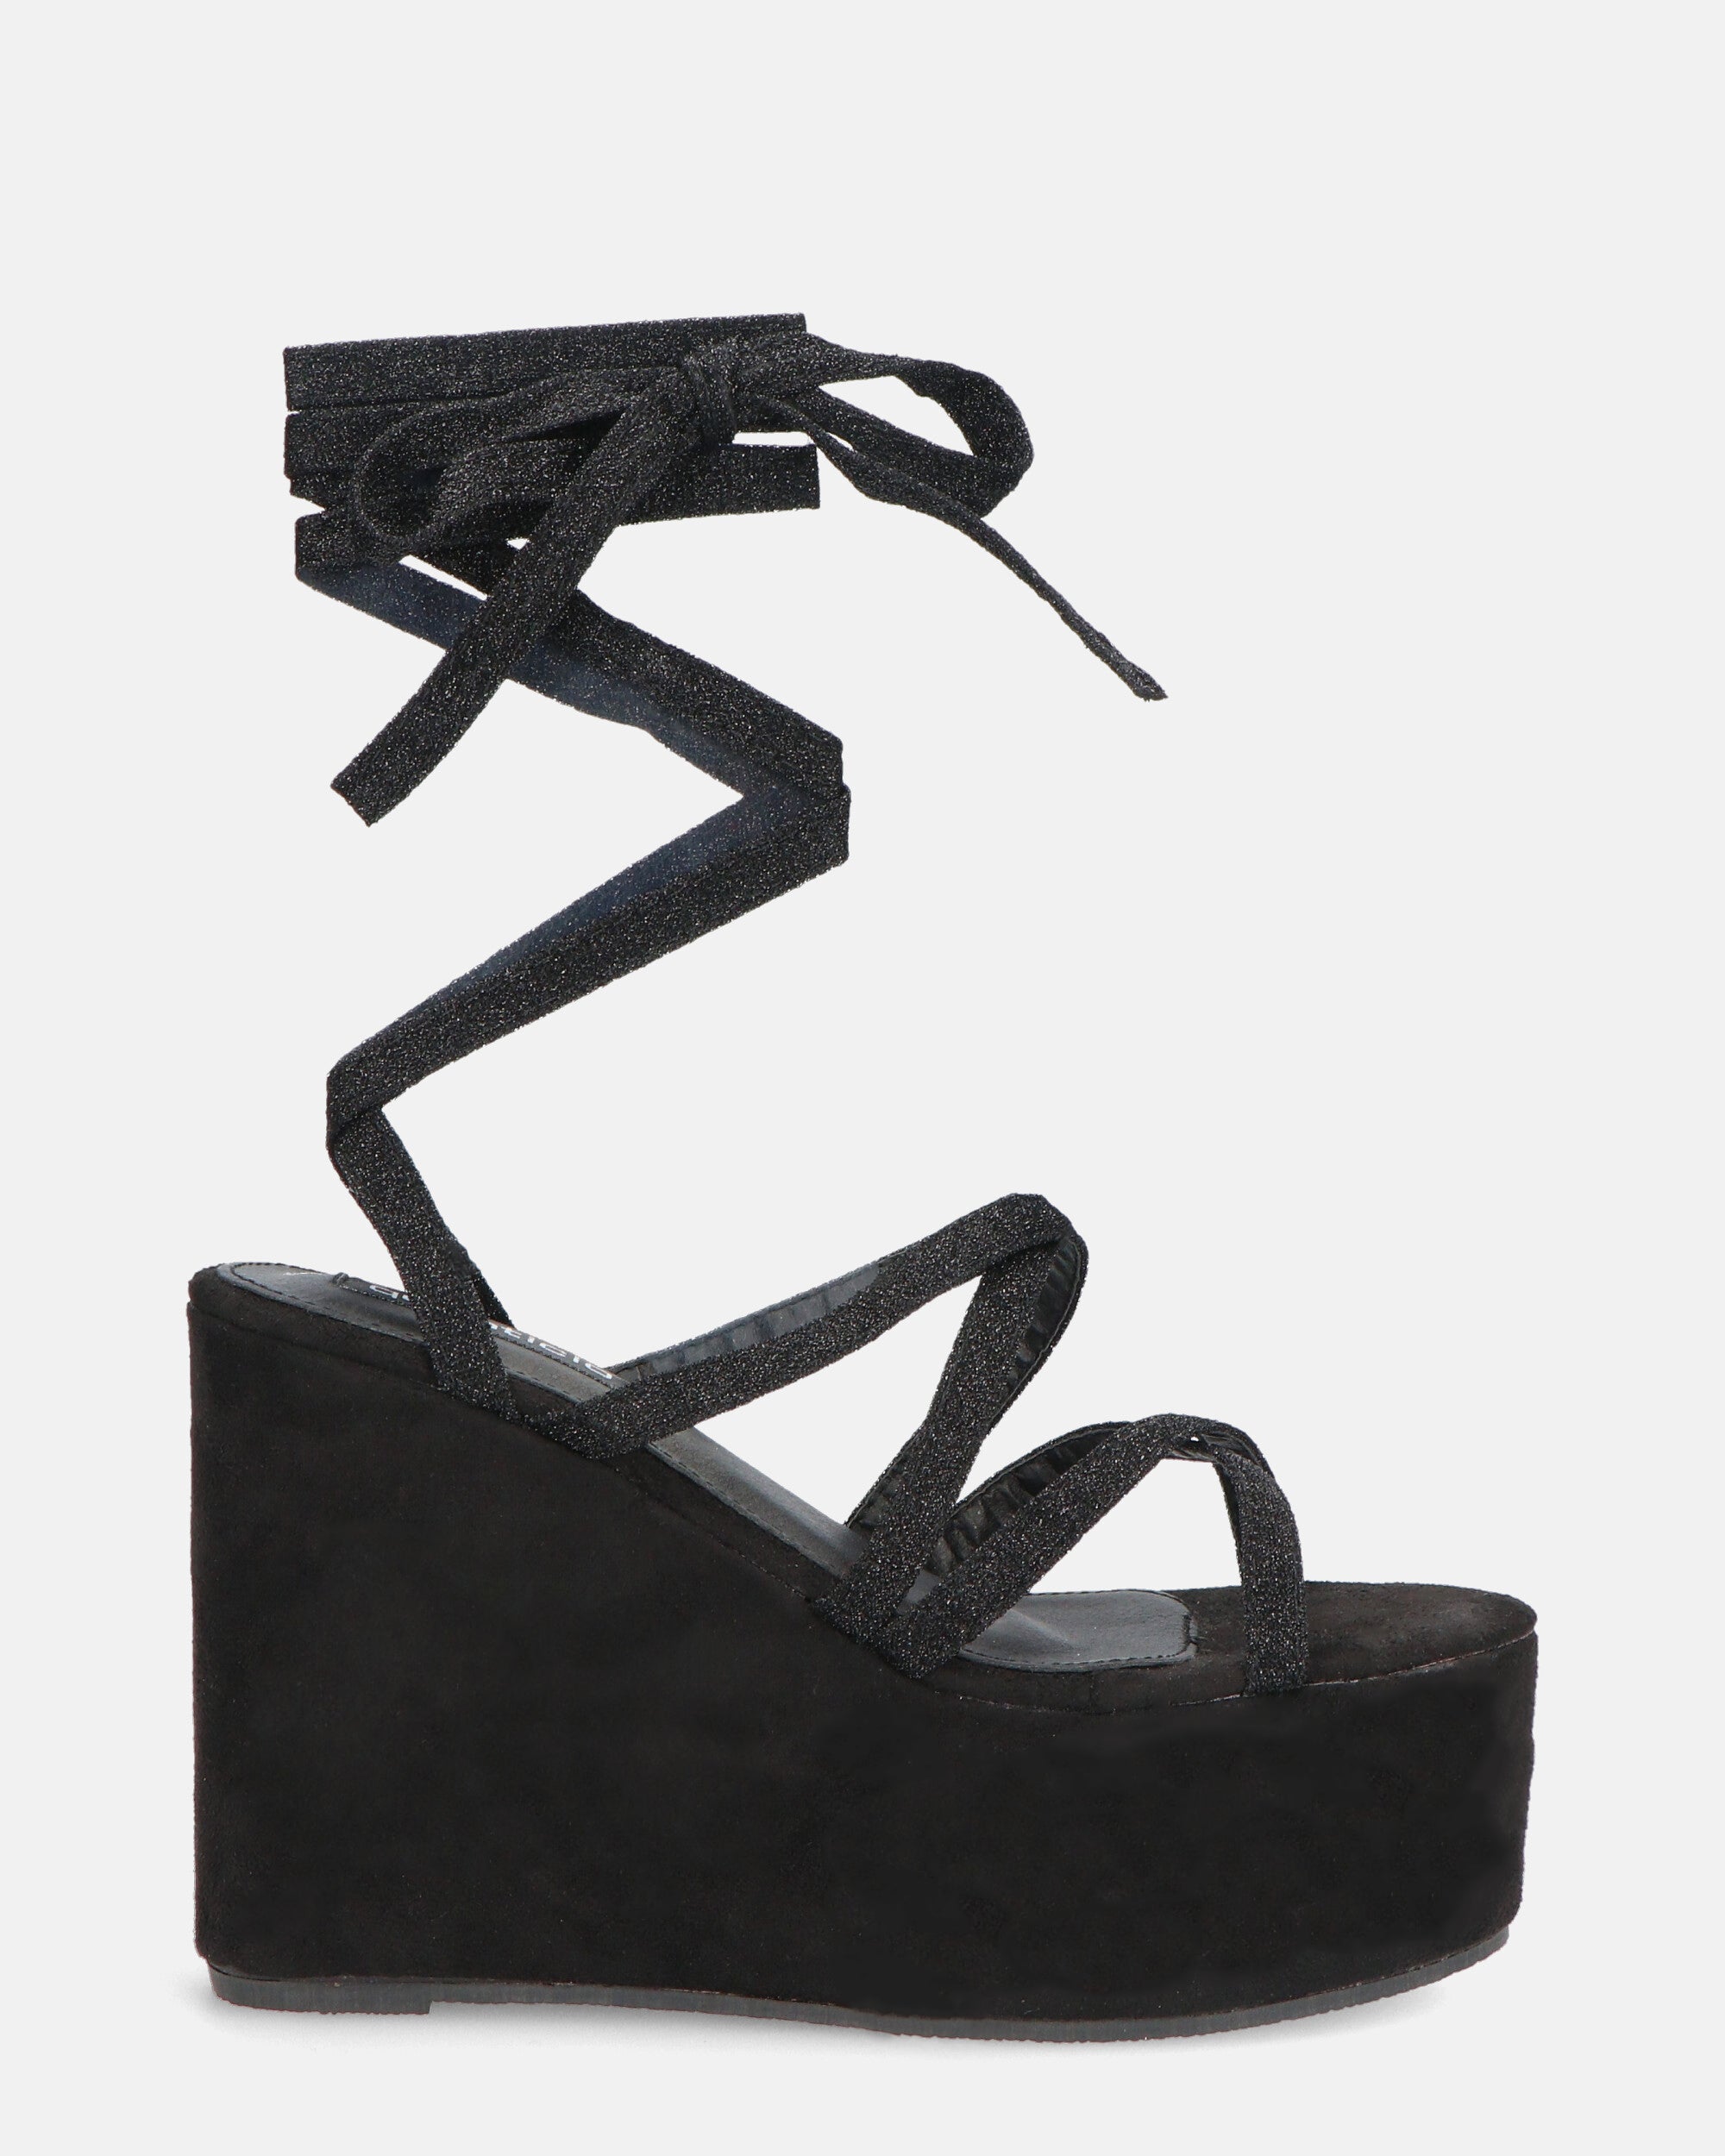 OLLIE - wedge sandals in black with glitter laces